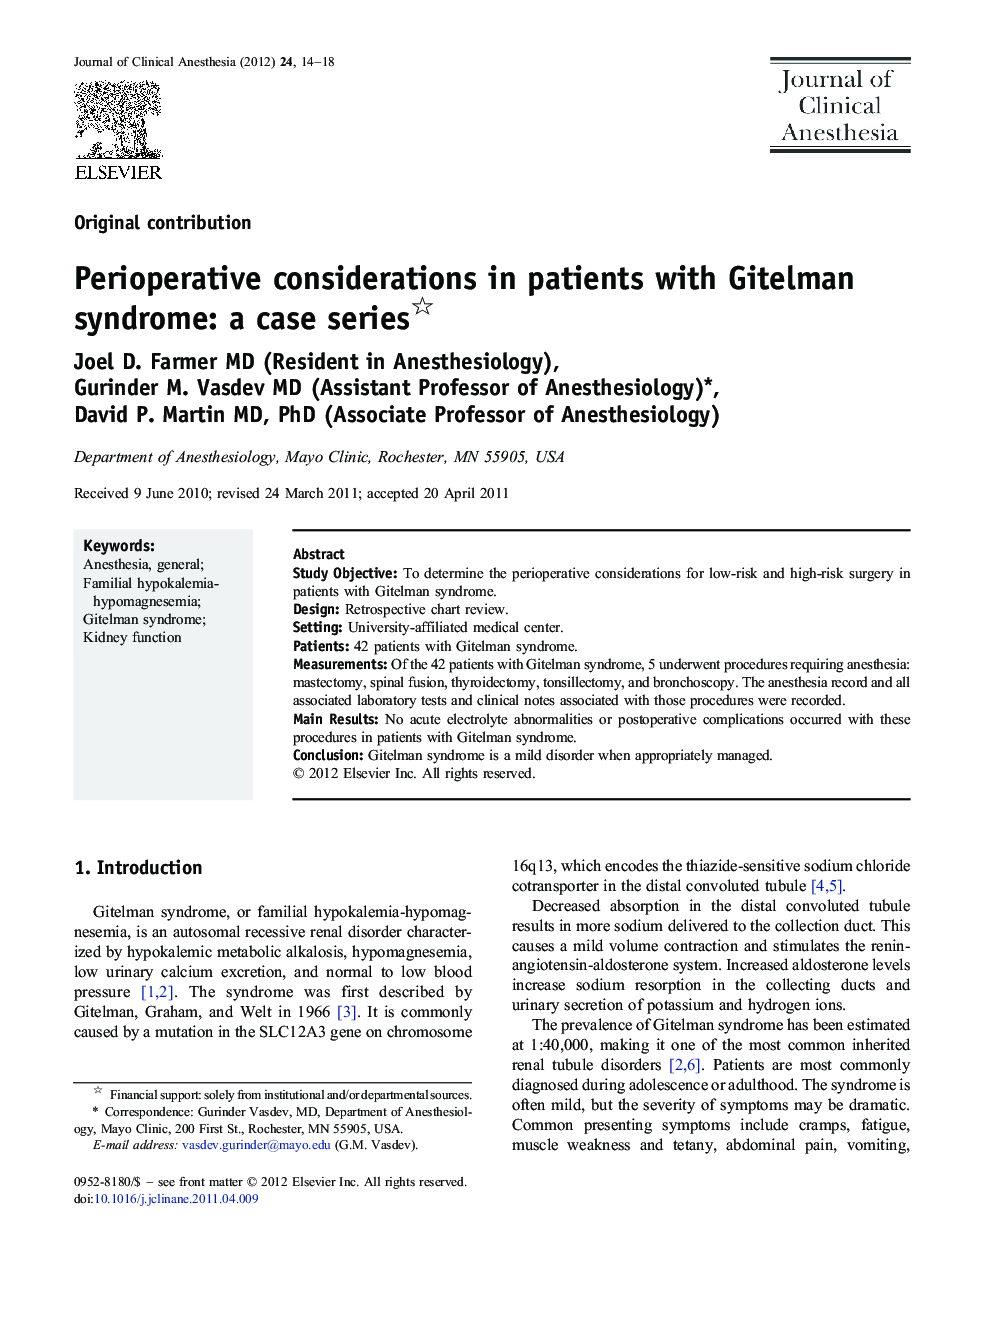 Perioperative considerations in patients with Gitelman syndrome: a case series 